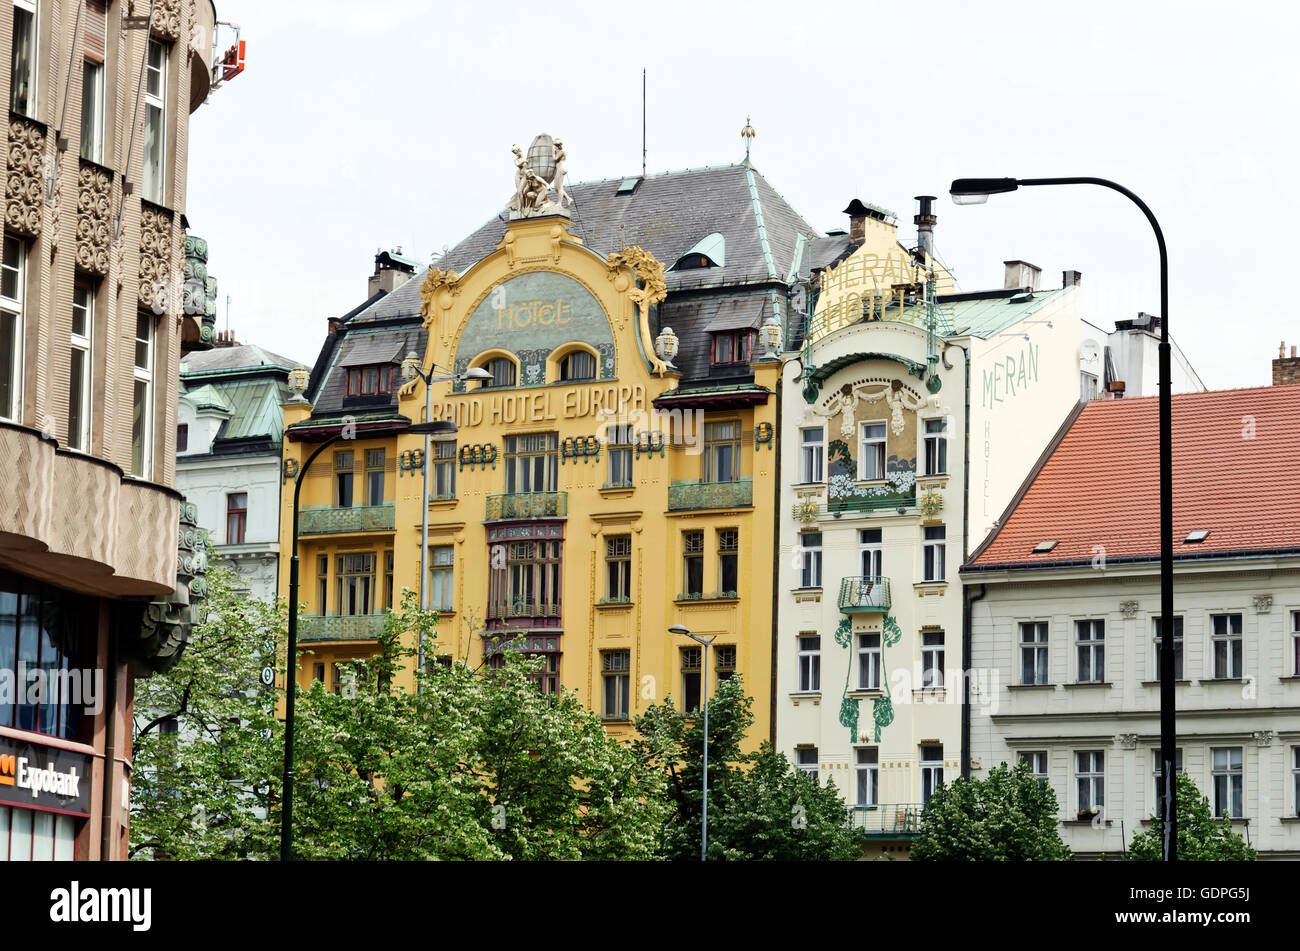 Large colourful hotel in Wenceslas Square in the centre of Prague (Praha) in the Czech Republic. Stock Photo